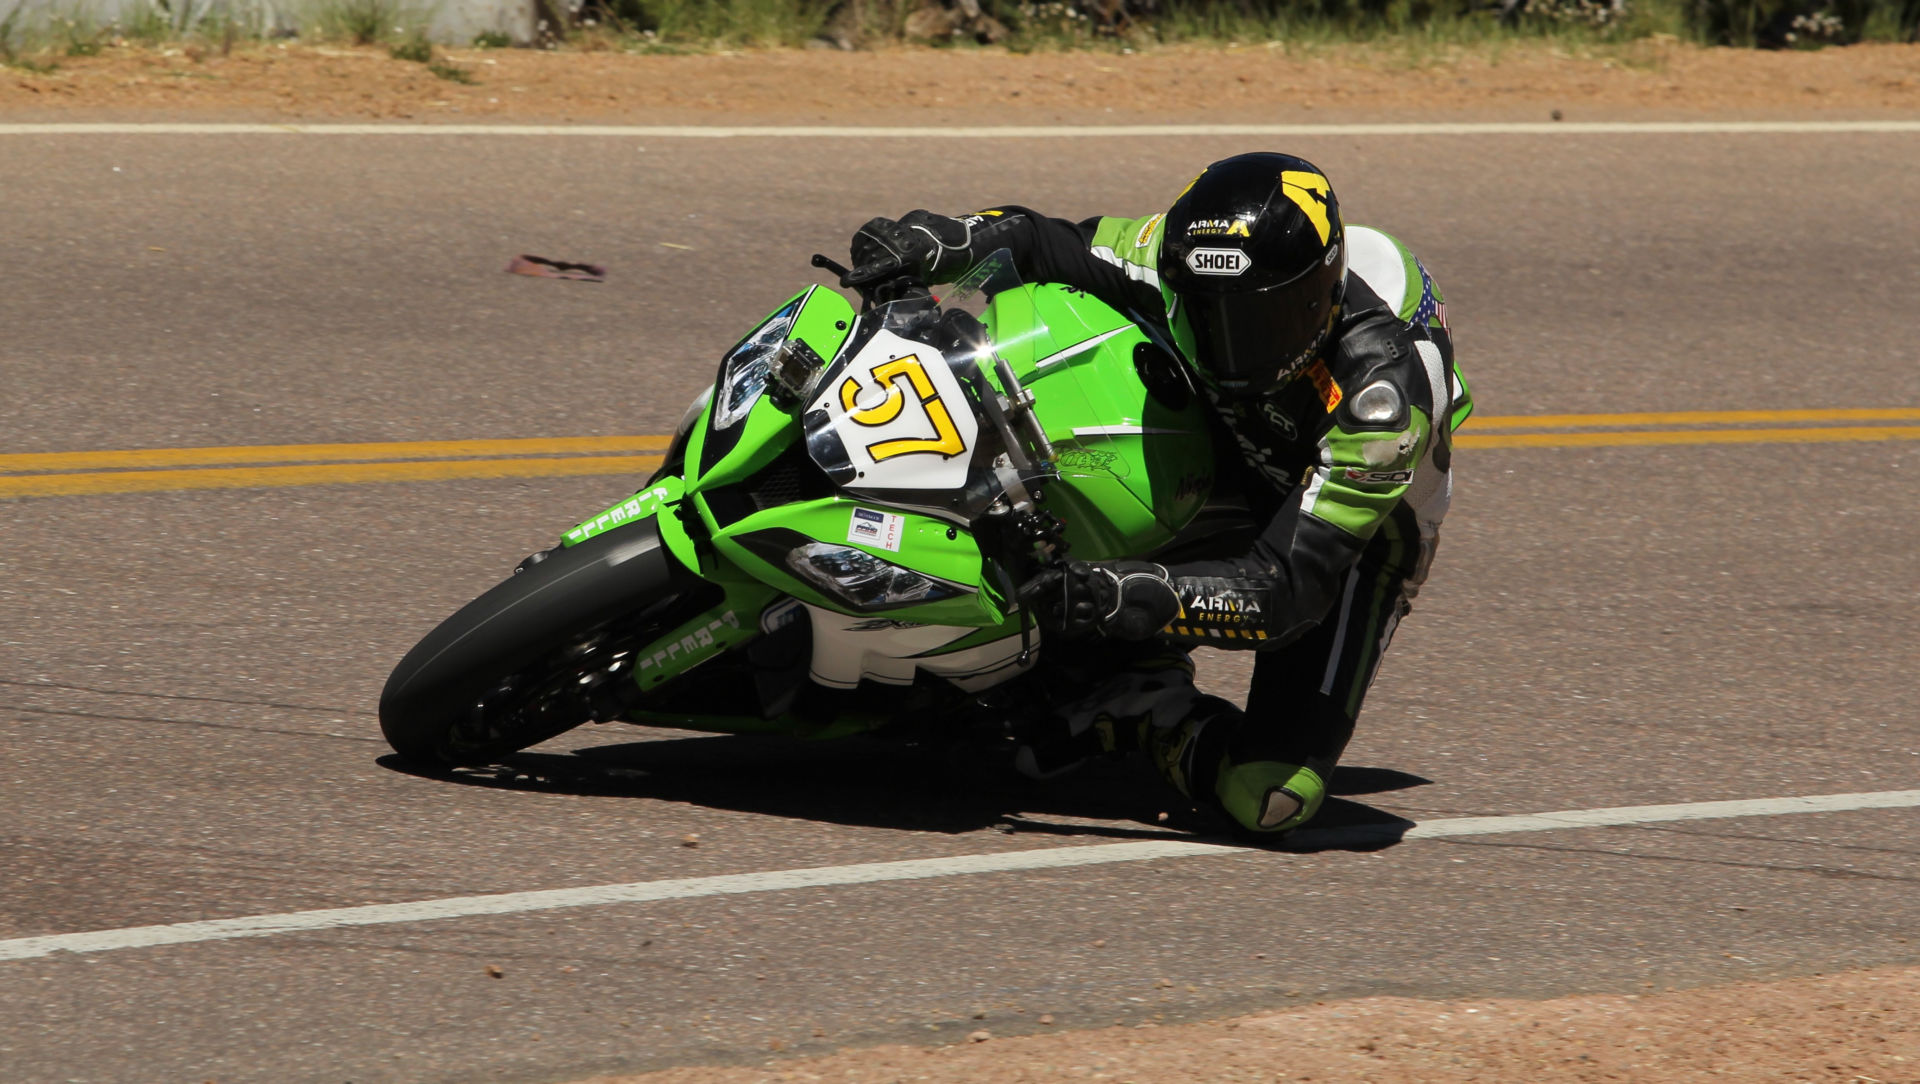 Jeremy Toye (57), competing as a rookie in the event, took top honors in the motorcycle division at the 2014 Pikes Peak International Hill Climb. Photo courtesy Pirelli.